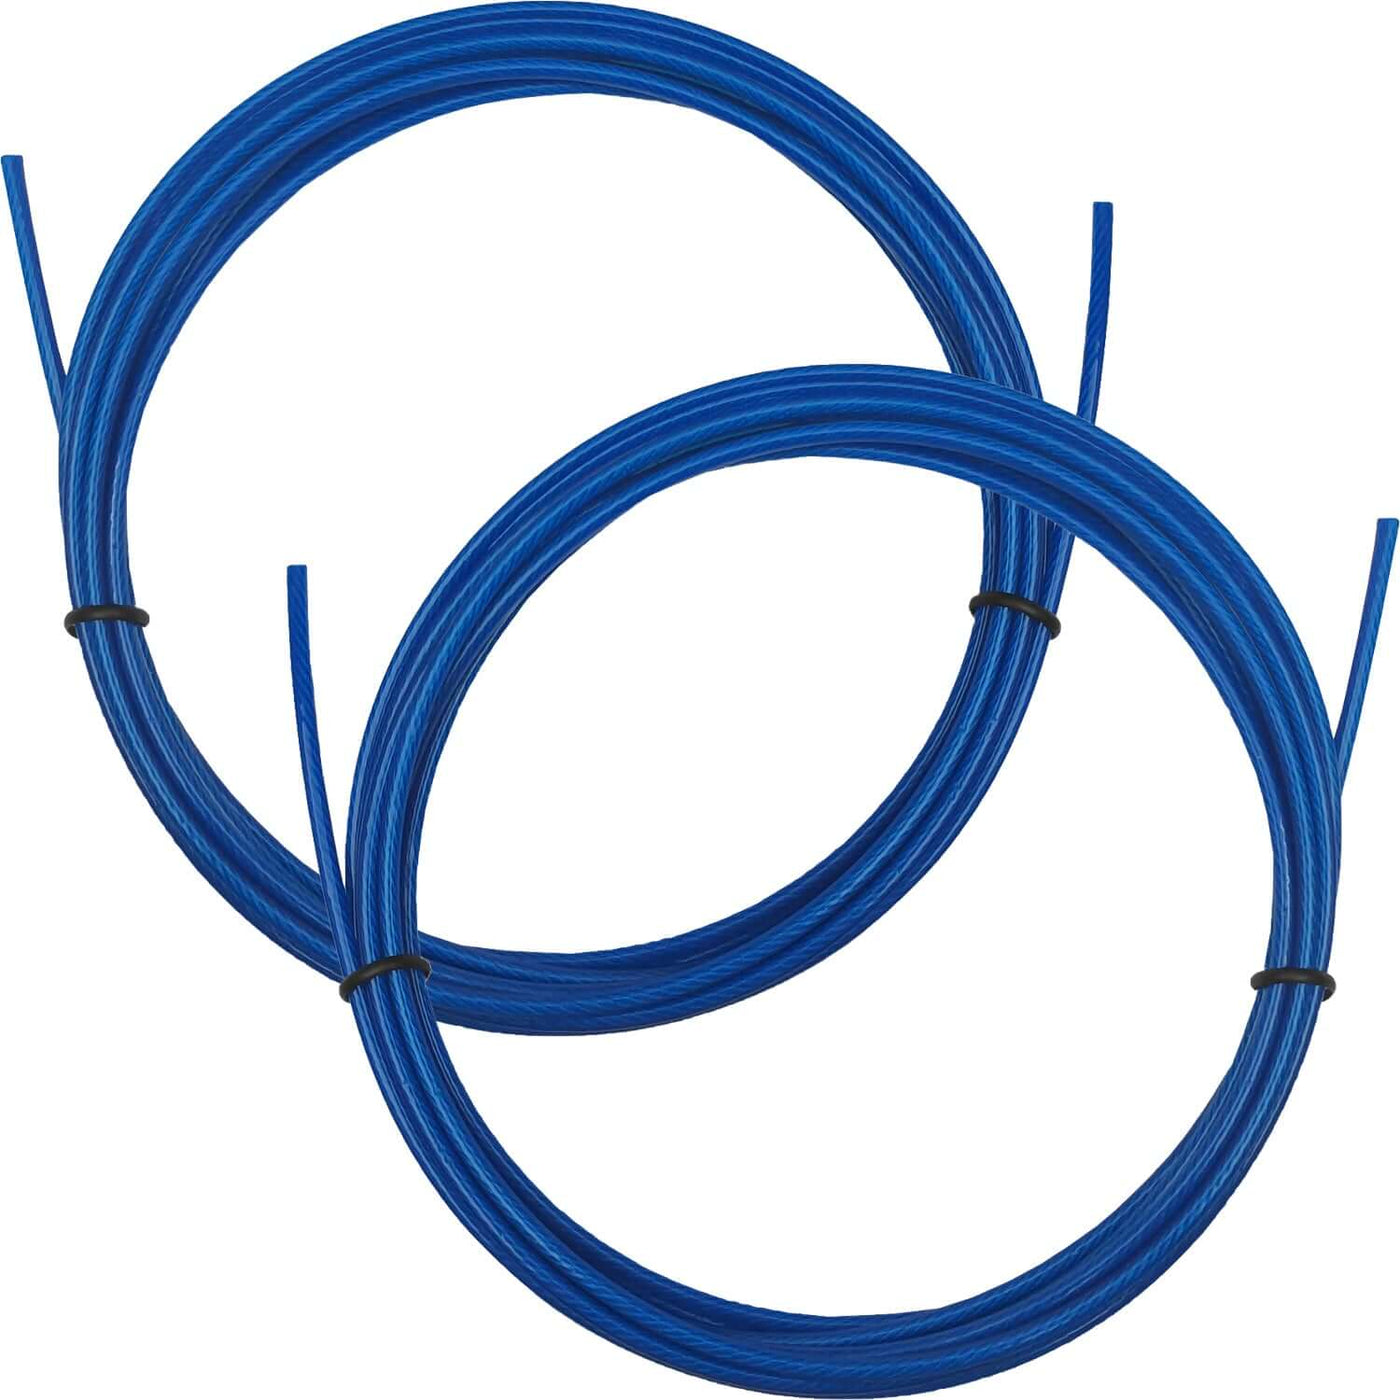 Murgs Replacement Skipping Rope Cable 2.5mm Blue 2 Pack